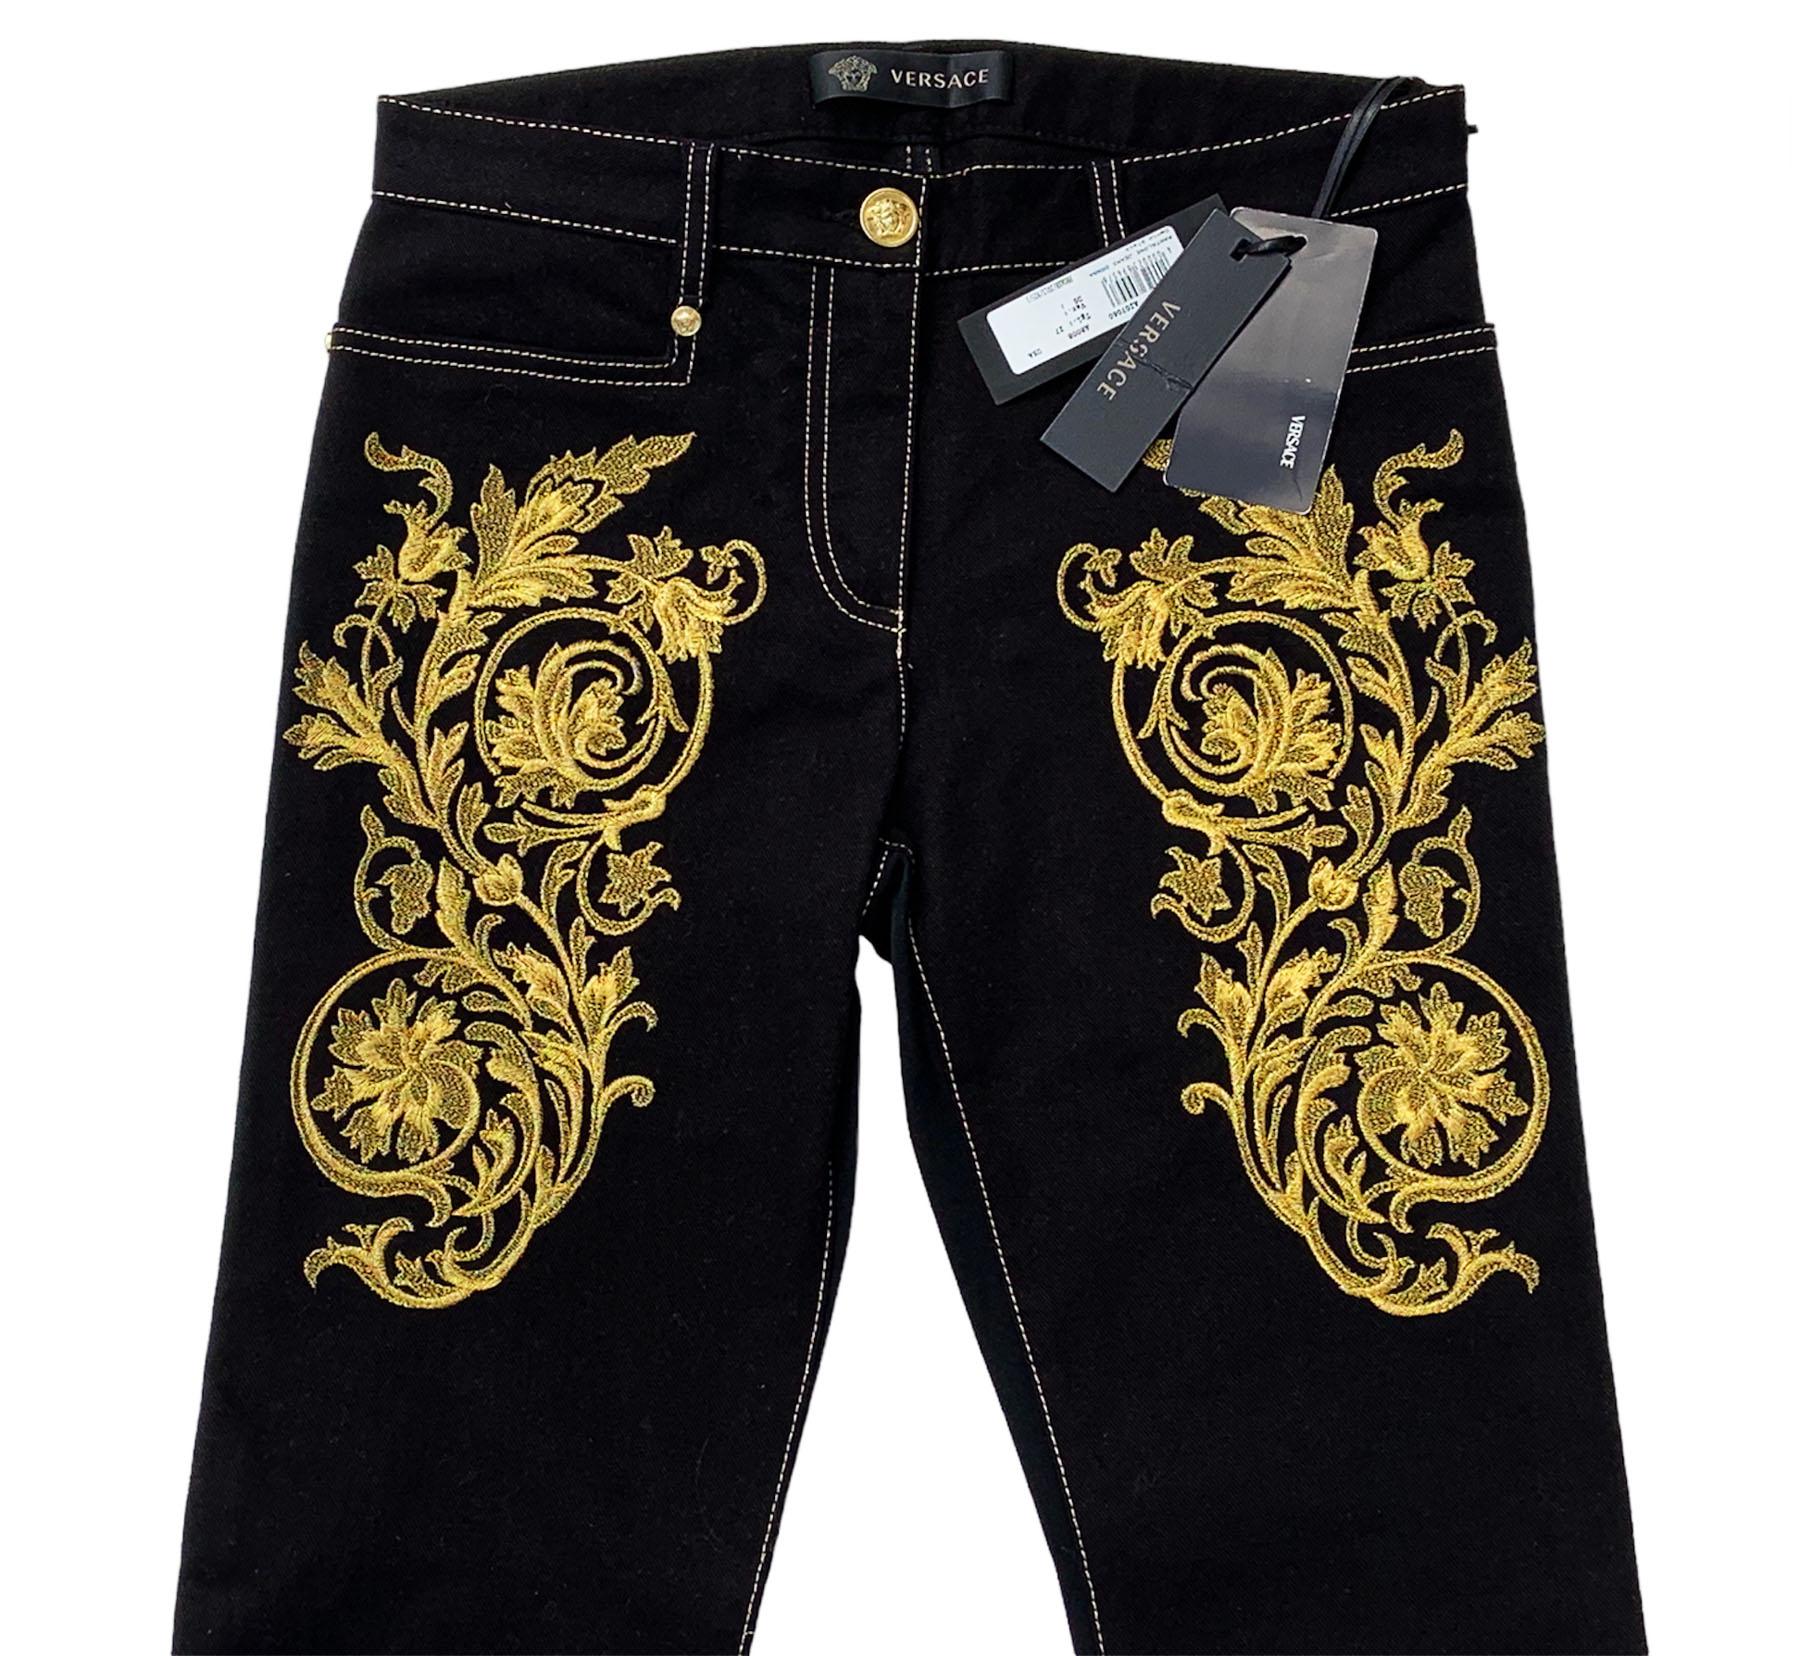 Women's NWT Versace $2150 Black Gold Baroque Embroidery Stretch Jeans size 27 and 26 For Sale